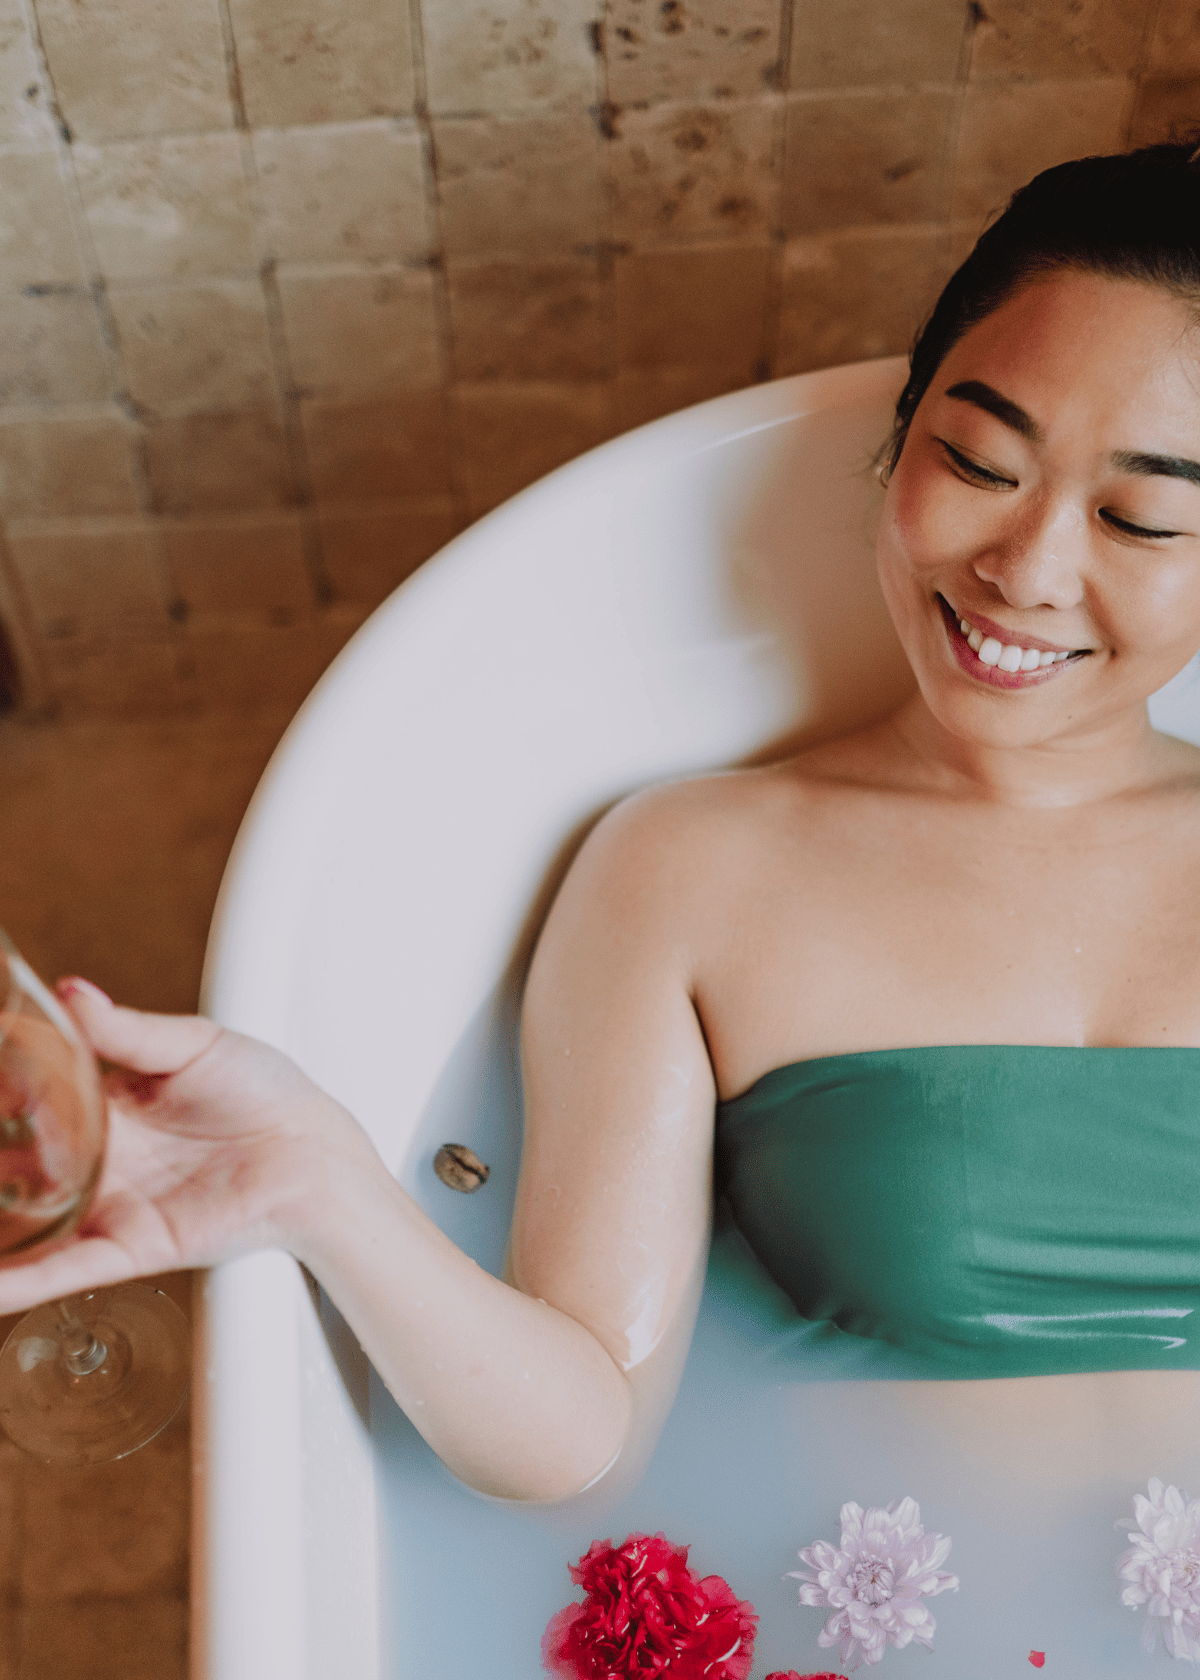 How to Get Your Skin Clean and Fresh with Body Wash